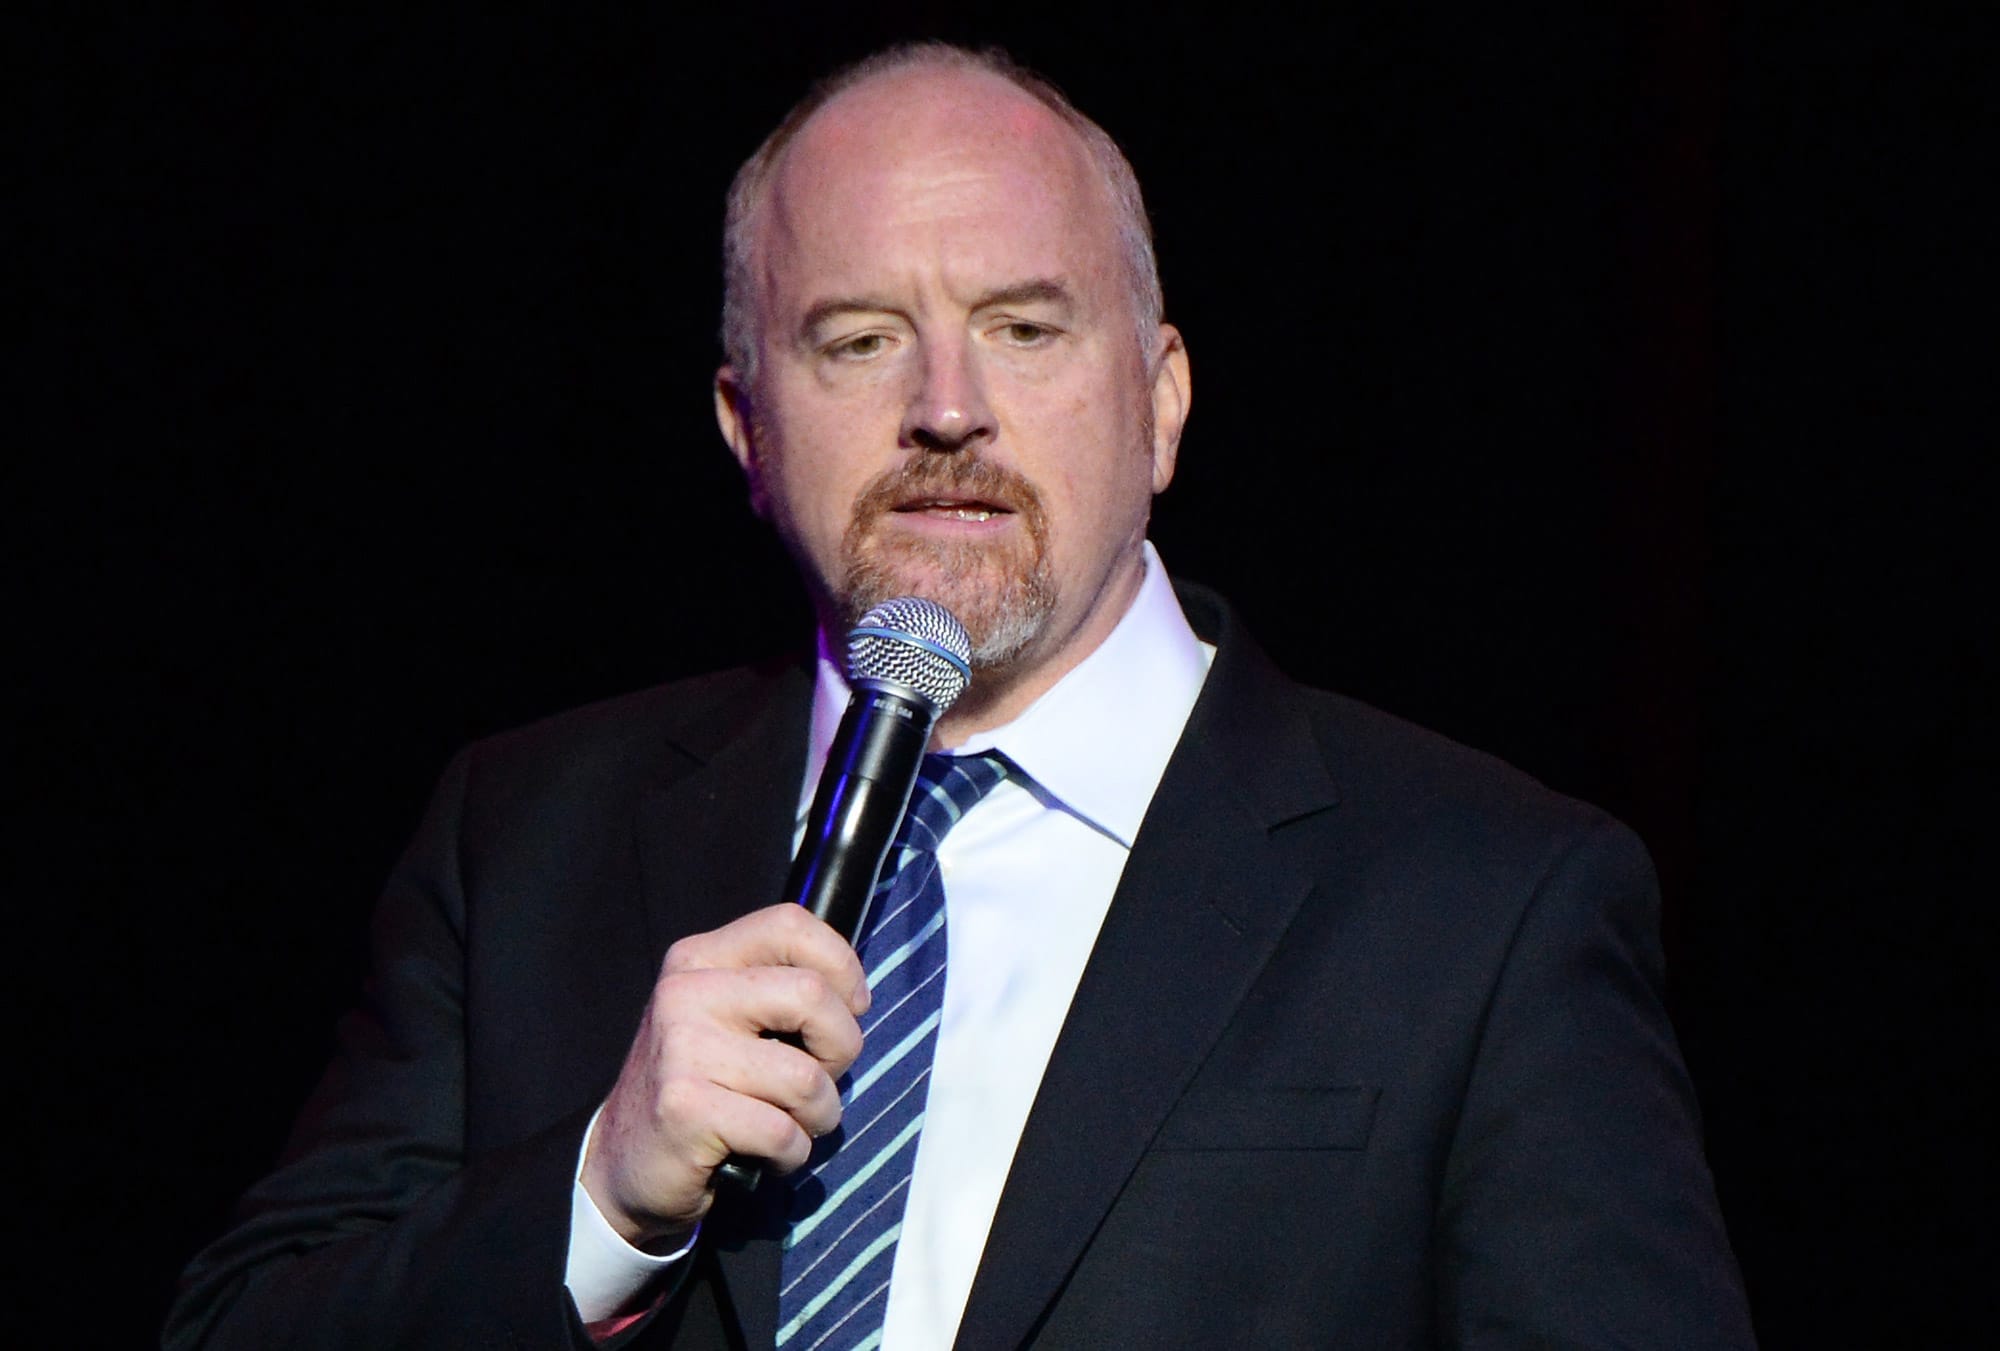 Disgraced comedian Louis CK is going on a world tour — so much for cancel culture